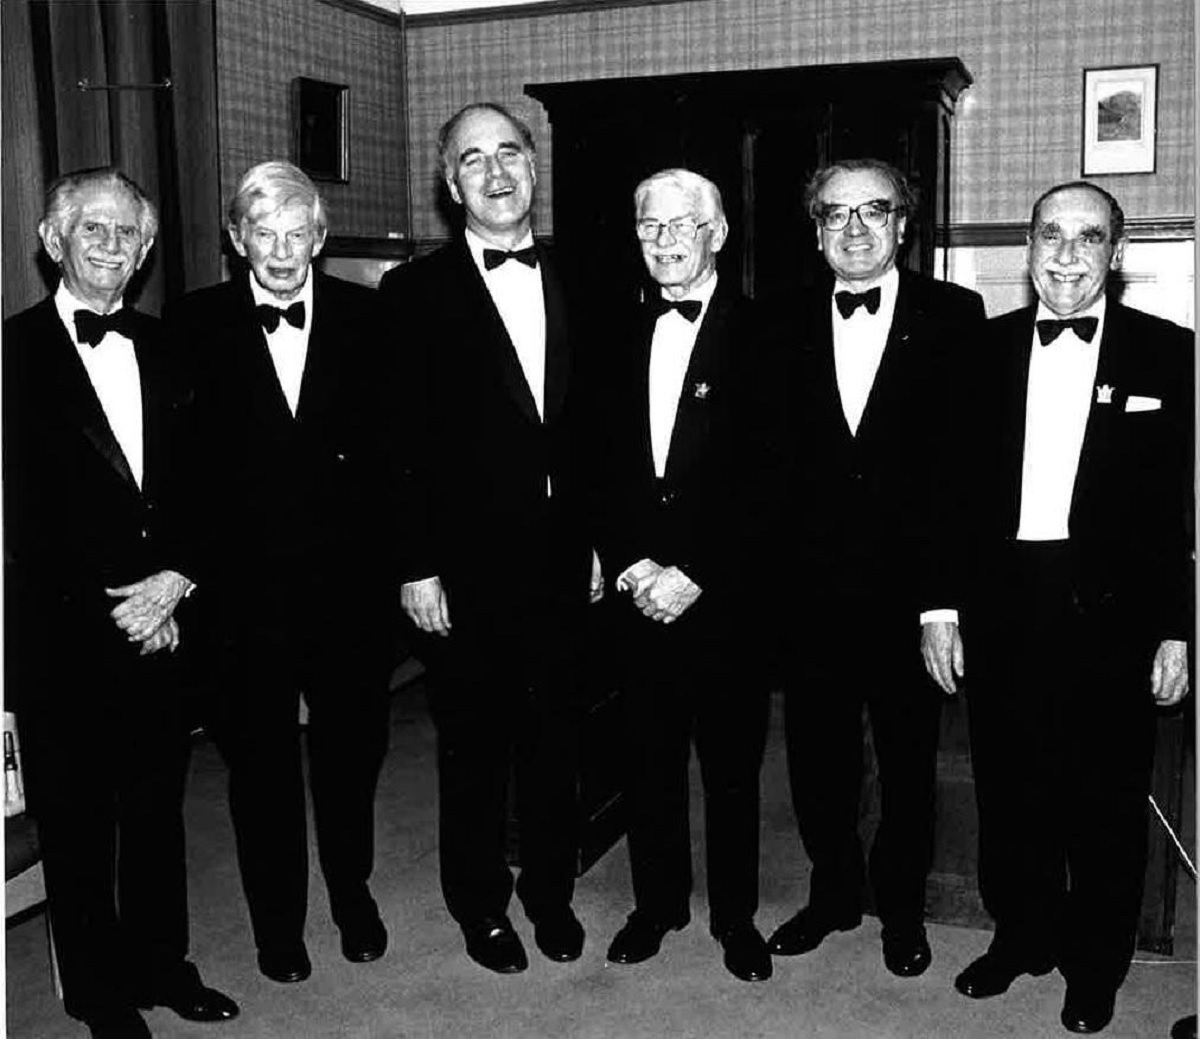 Stepping back in time - Old Colcestrians held their annual dinner in December 1989. In the picture are Sir Monty Finniston, J Elam, Stewart Francis, John Brunning, Dr G Martin and Arthur Parsonson